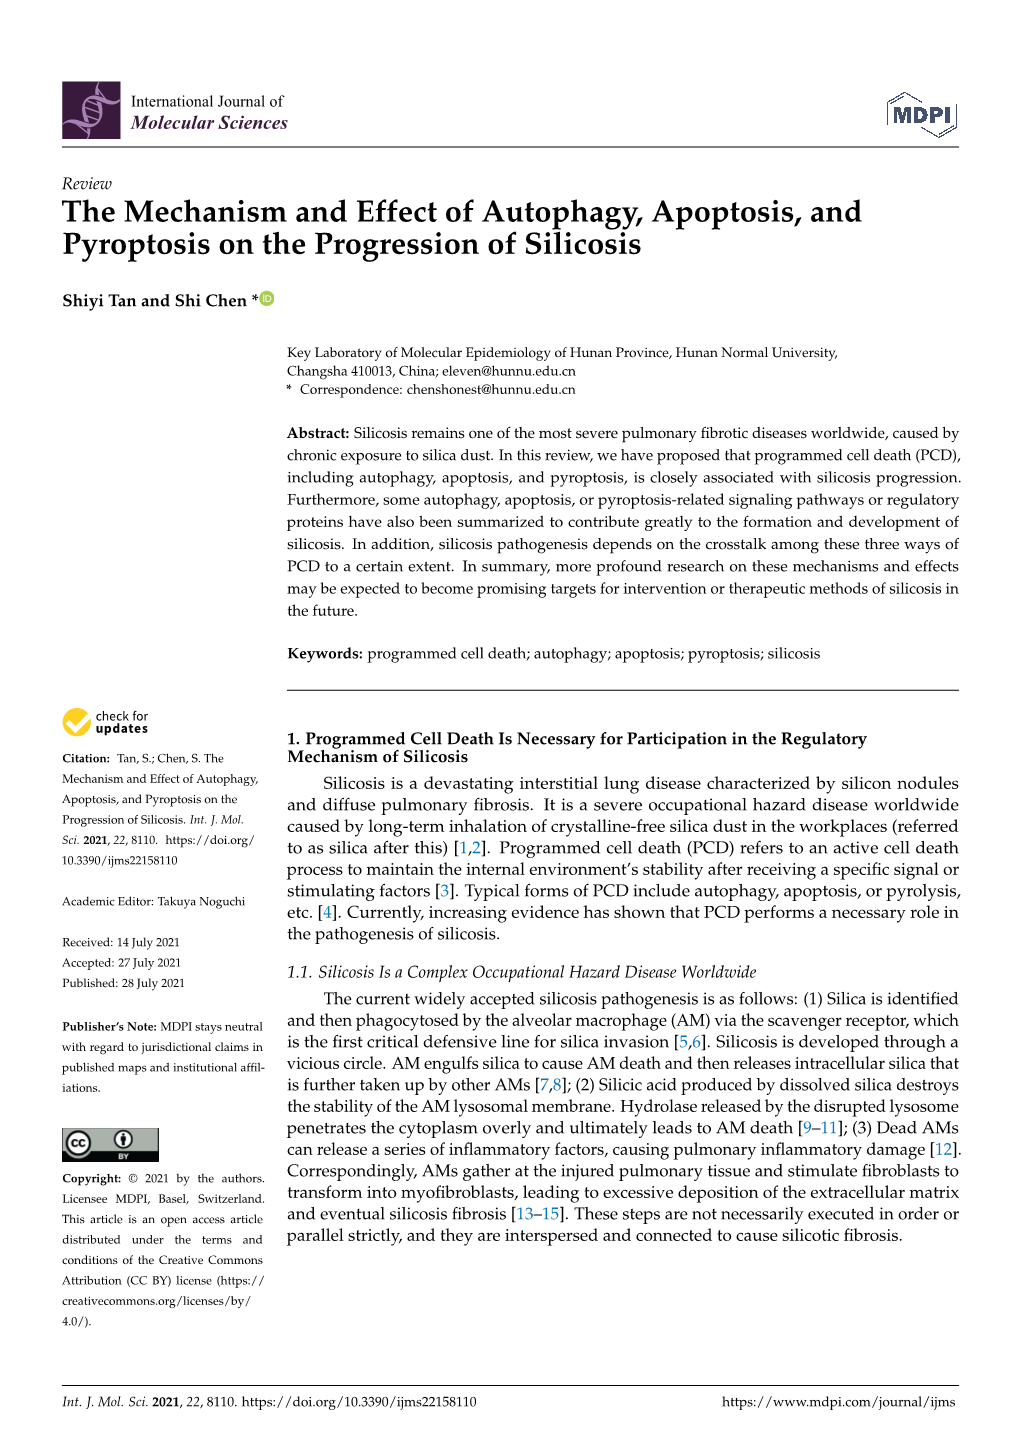 The Mechanism and Effect of Autophagy, Apoptosis, and Pyroptosis on the Progression of Silicosis